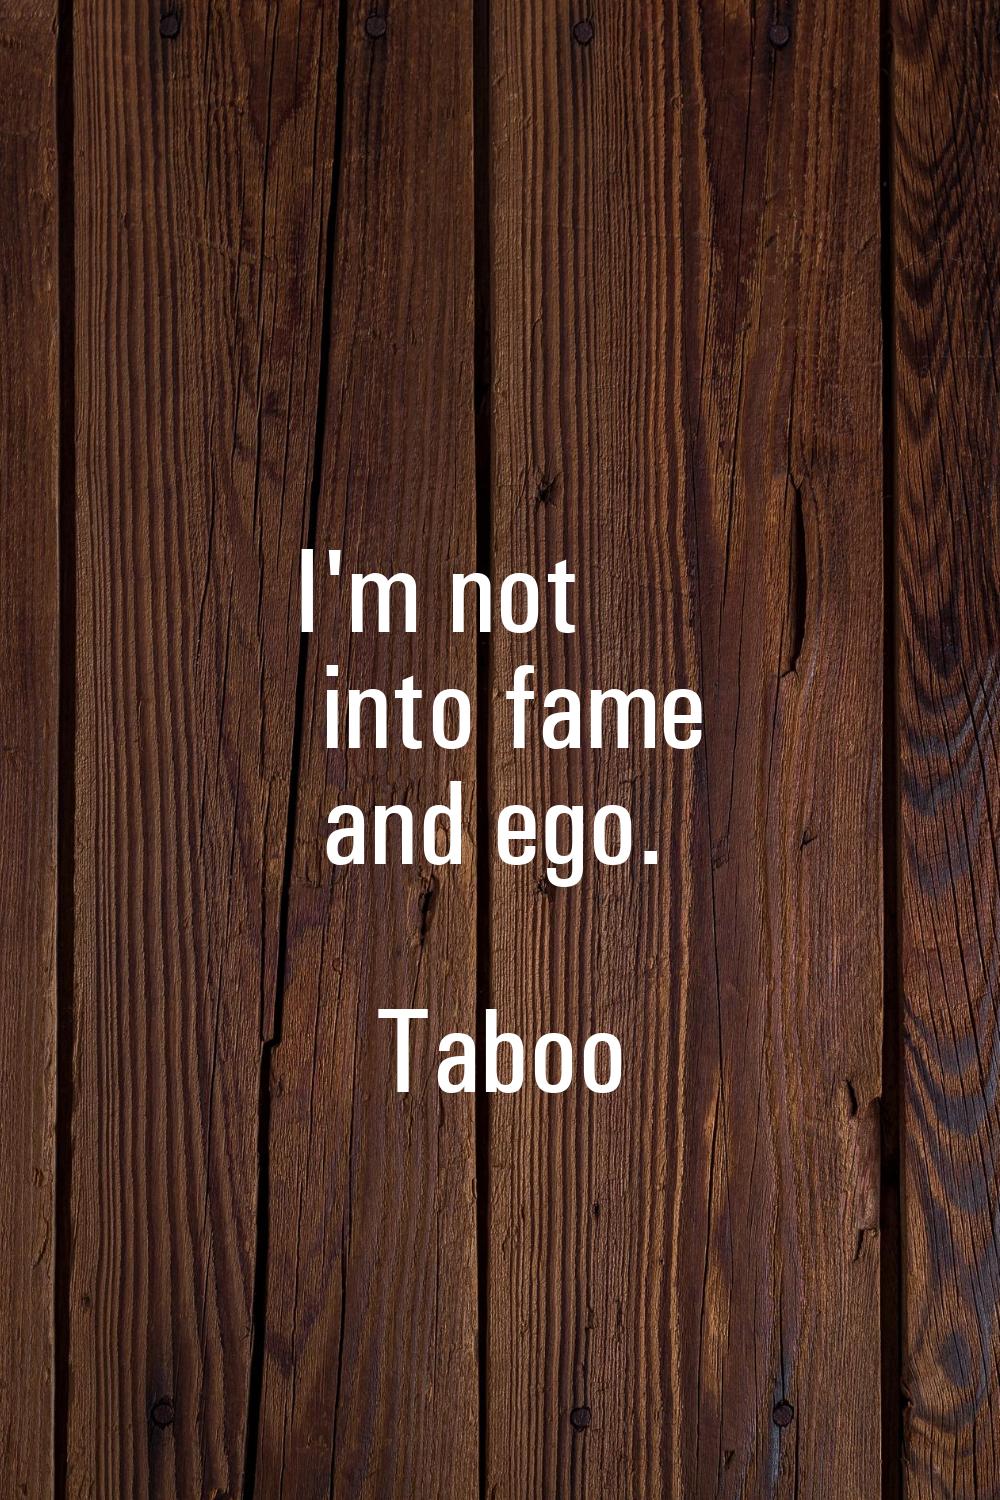 I'm not into fame and ego.